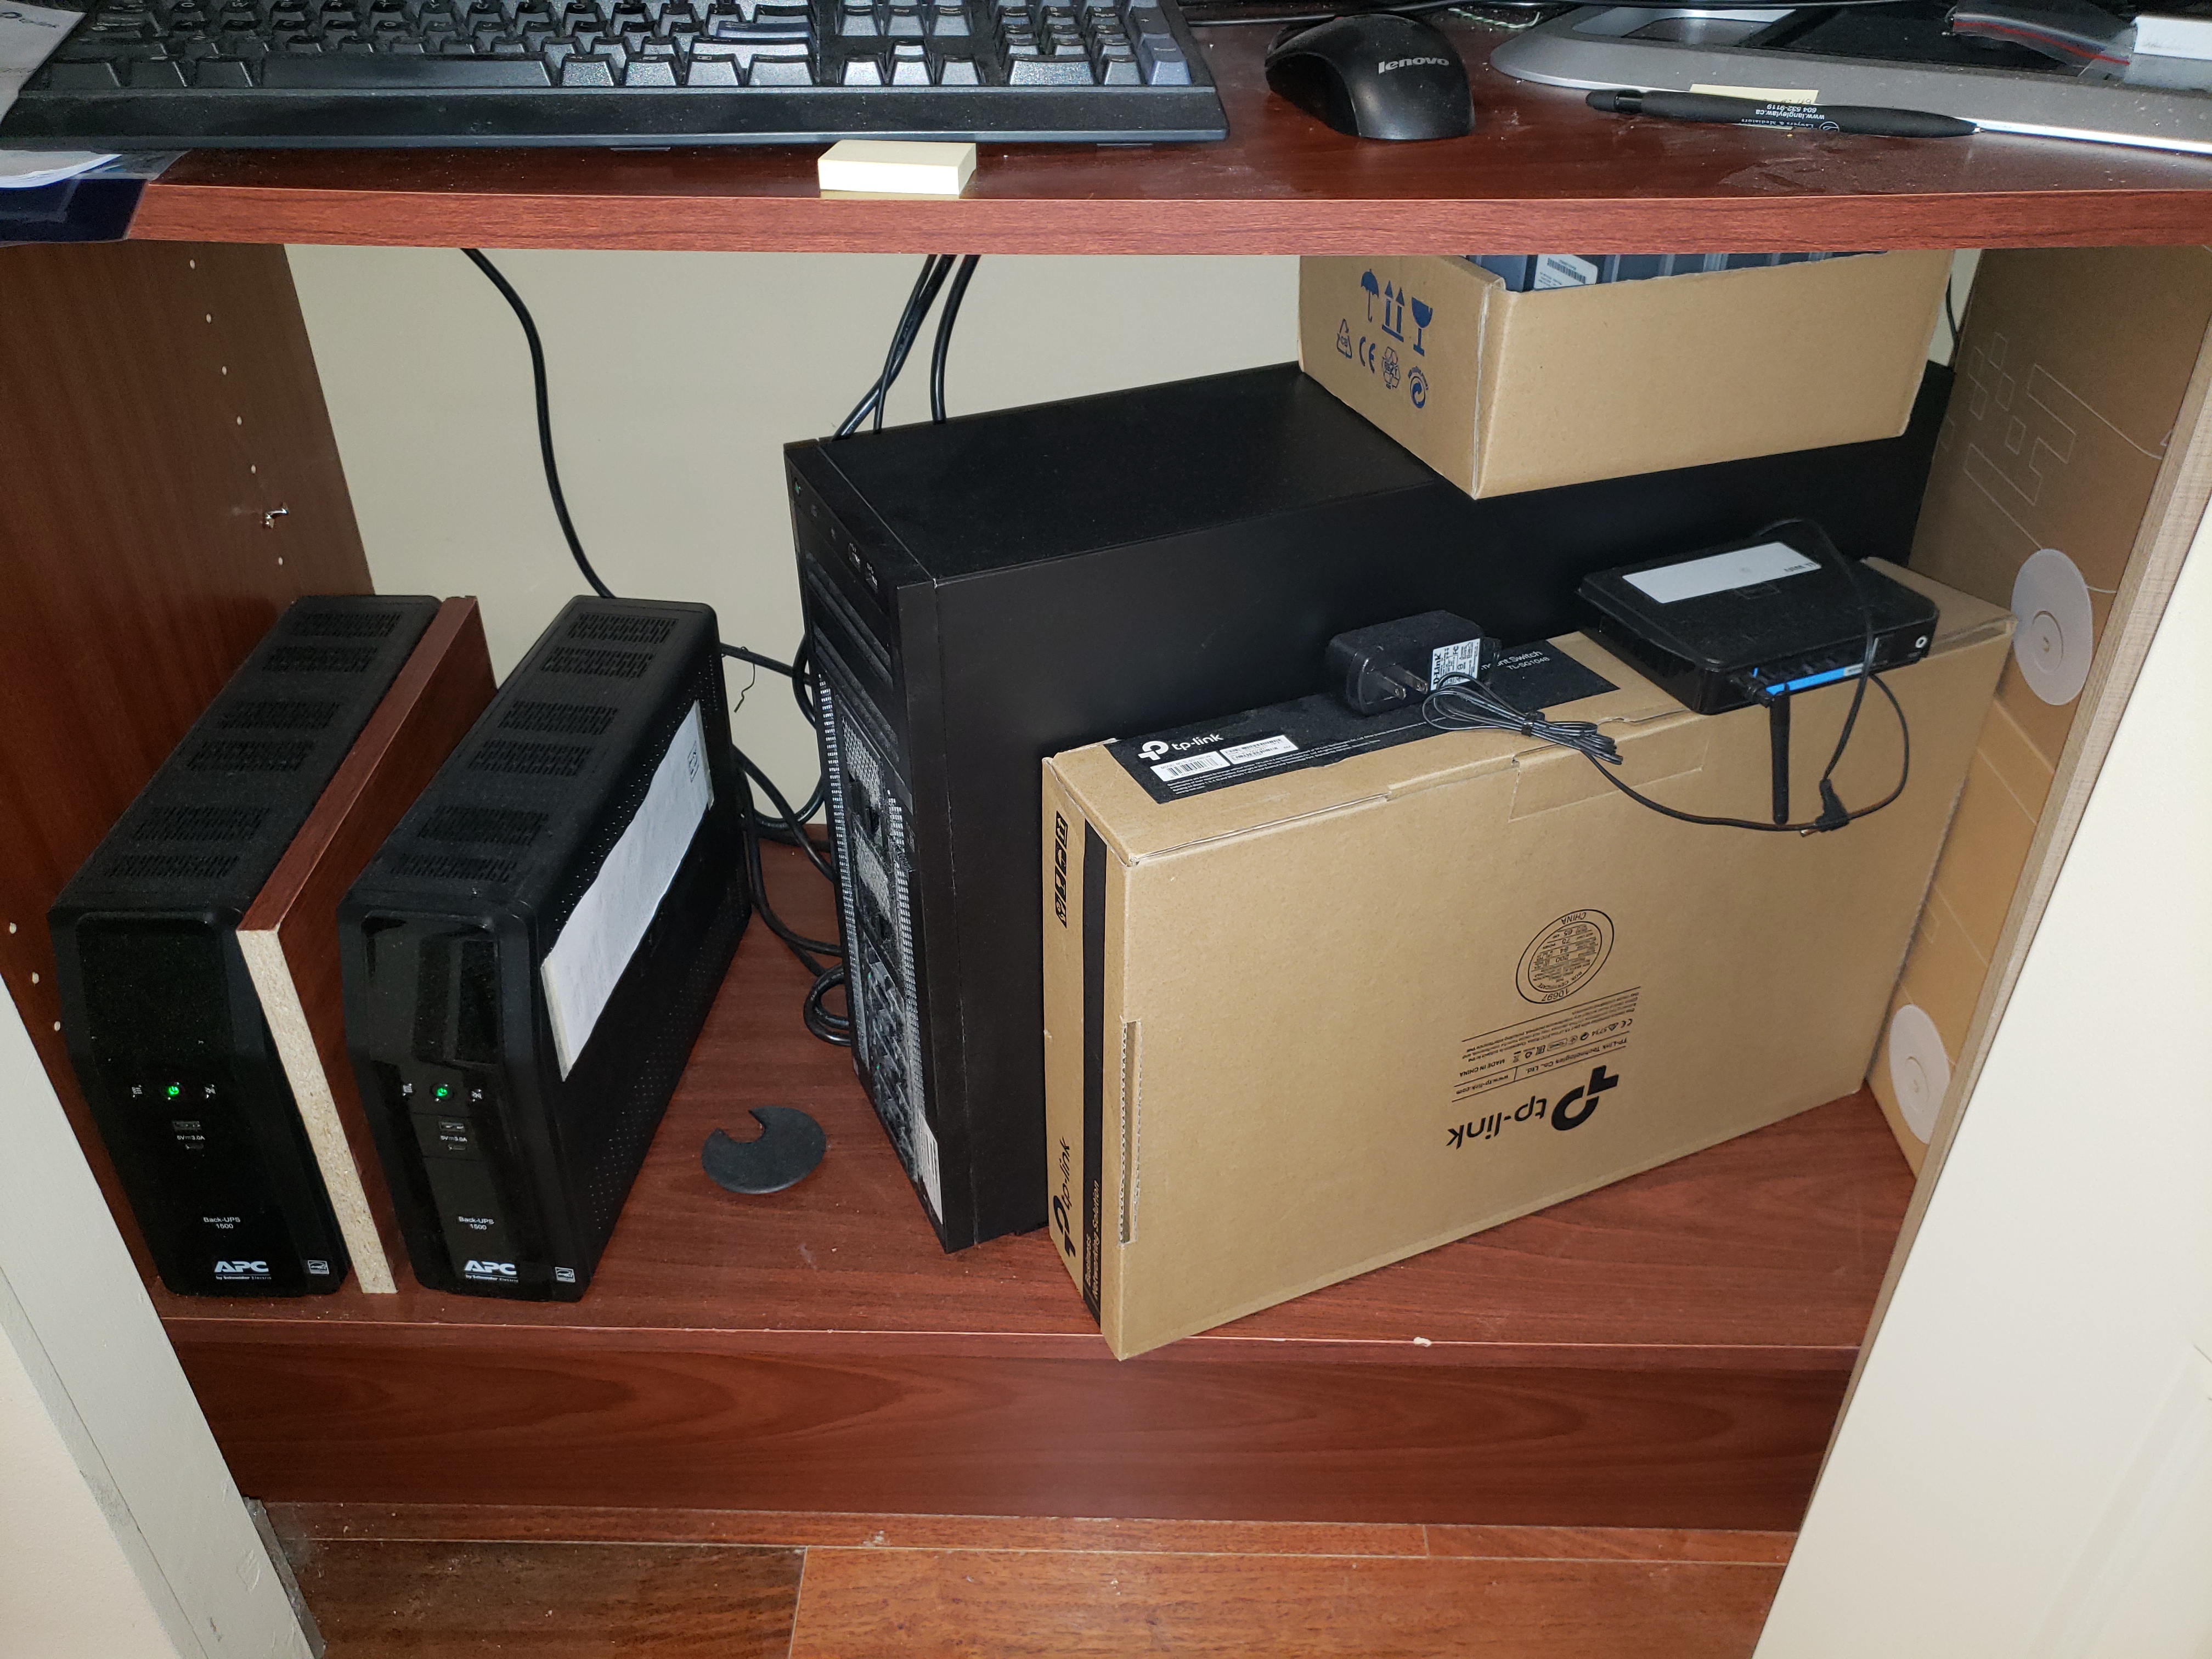 UPS for servers (left) and old server (right)